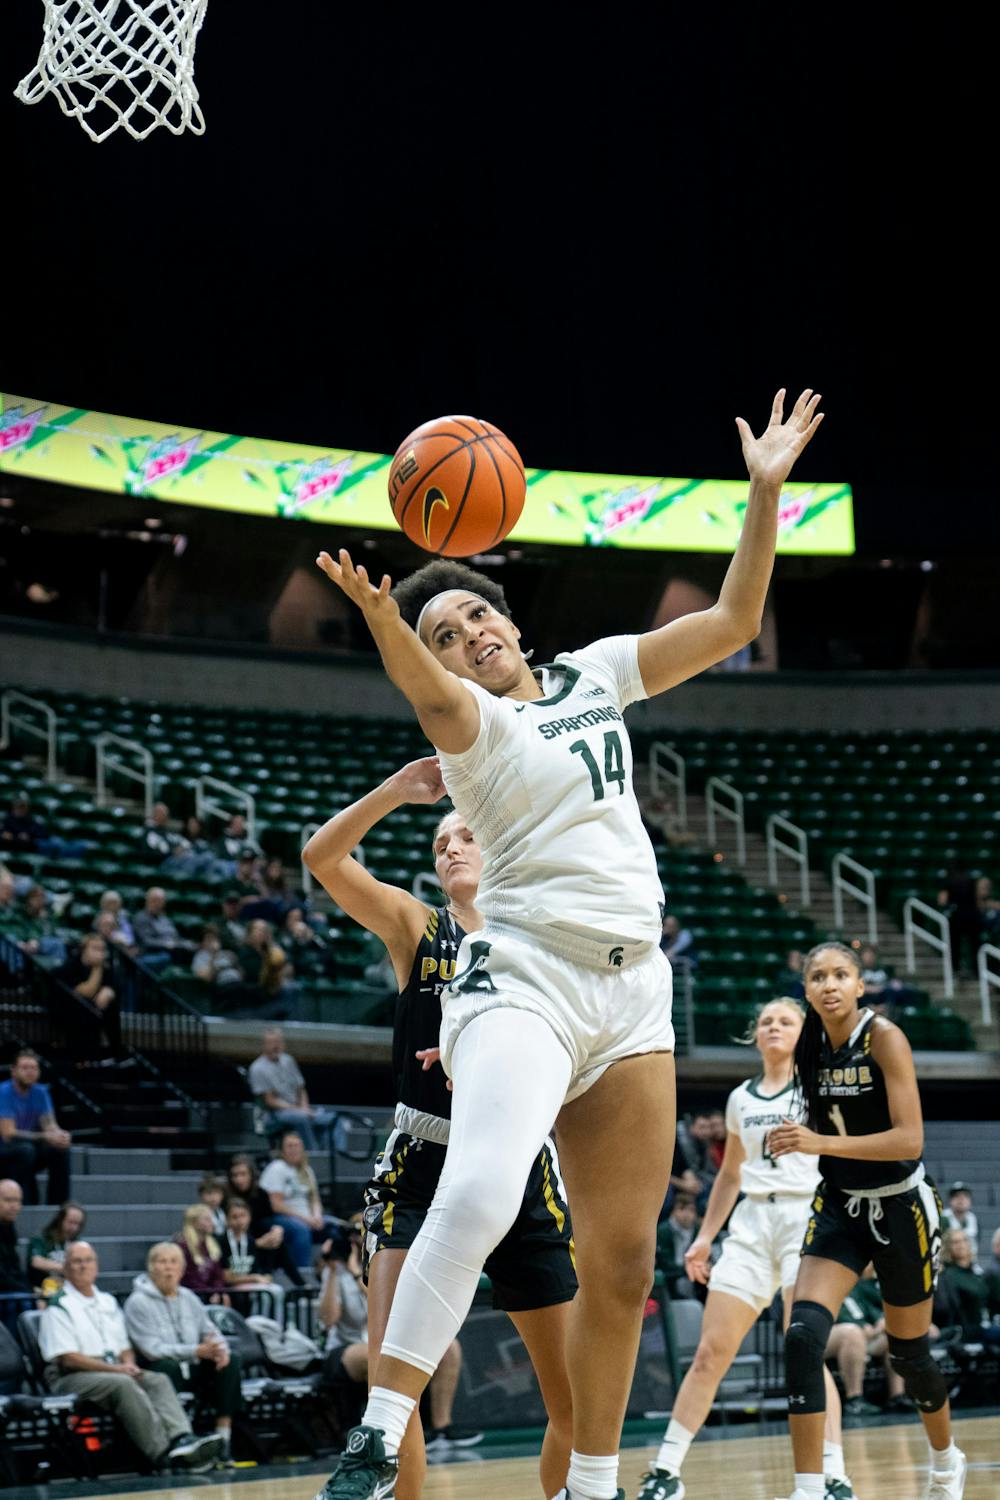 Senior forward Taiyier Parks (14) shoots a shot during a game against Purdue Fort Wayne at Breslin Center on Nov. 10, 2022. The Spartans defeated the Mastodons with a score of 85-53.